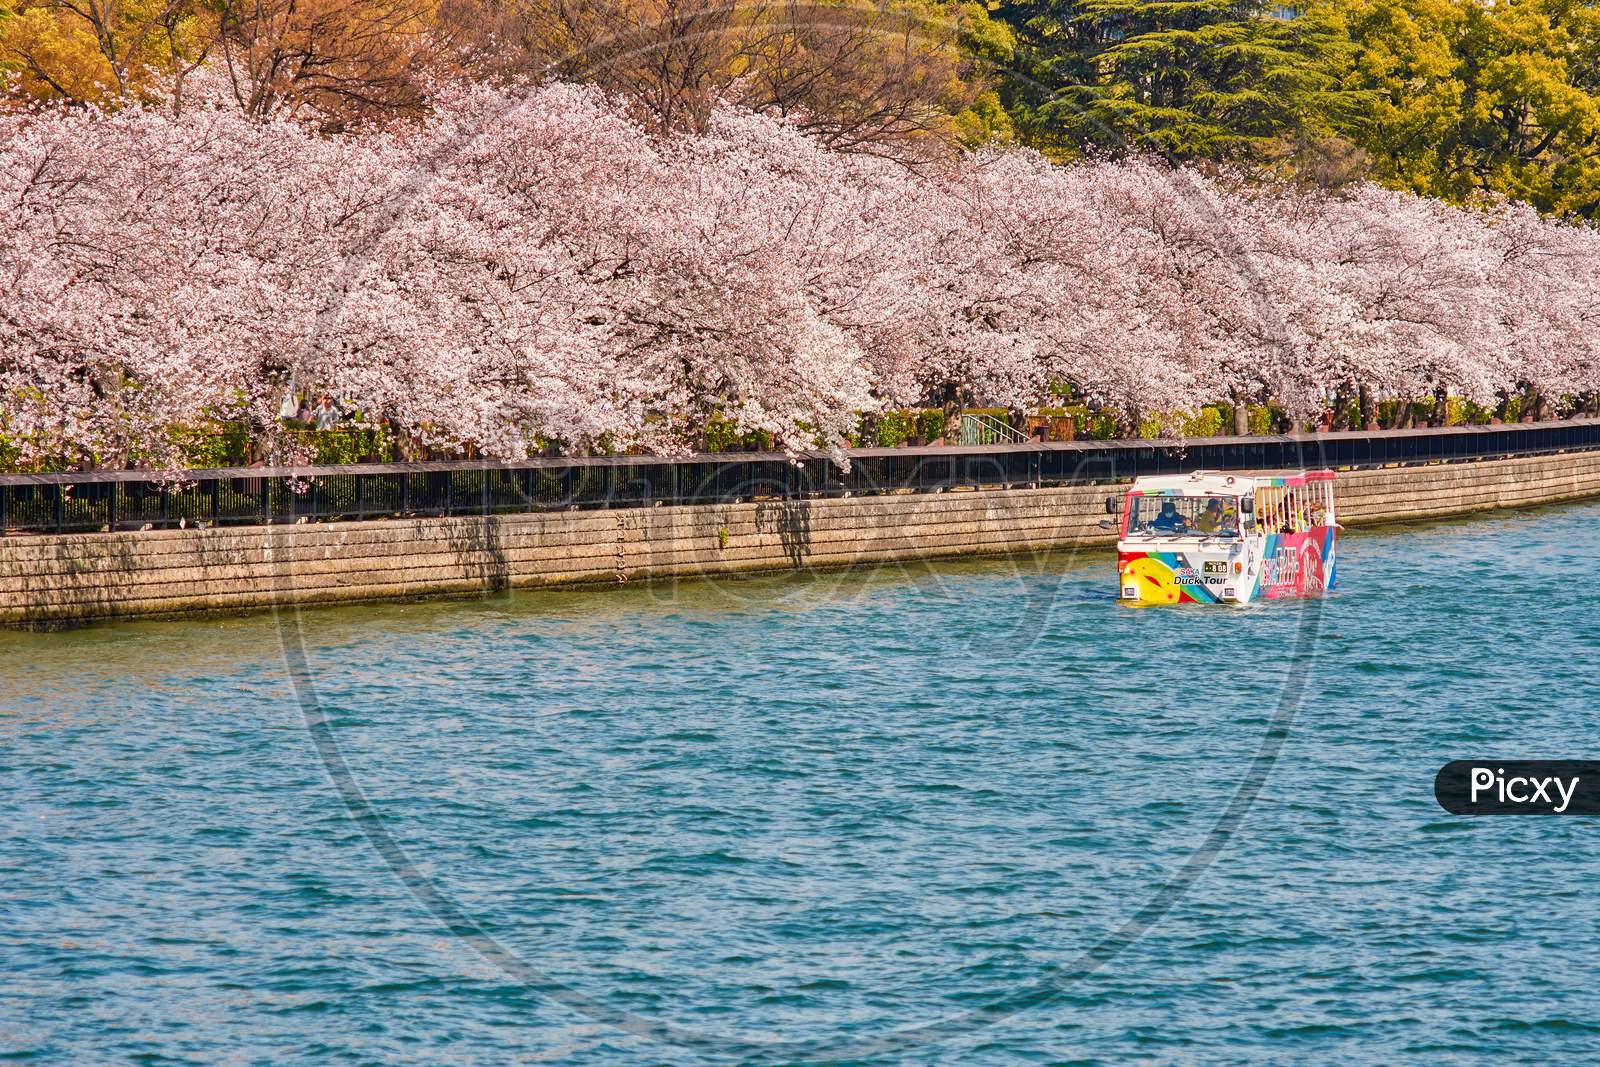 Tourist Boat Sailing The O River With Blooming Cherry Blossoms In Osaka, Japan